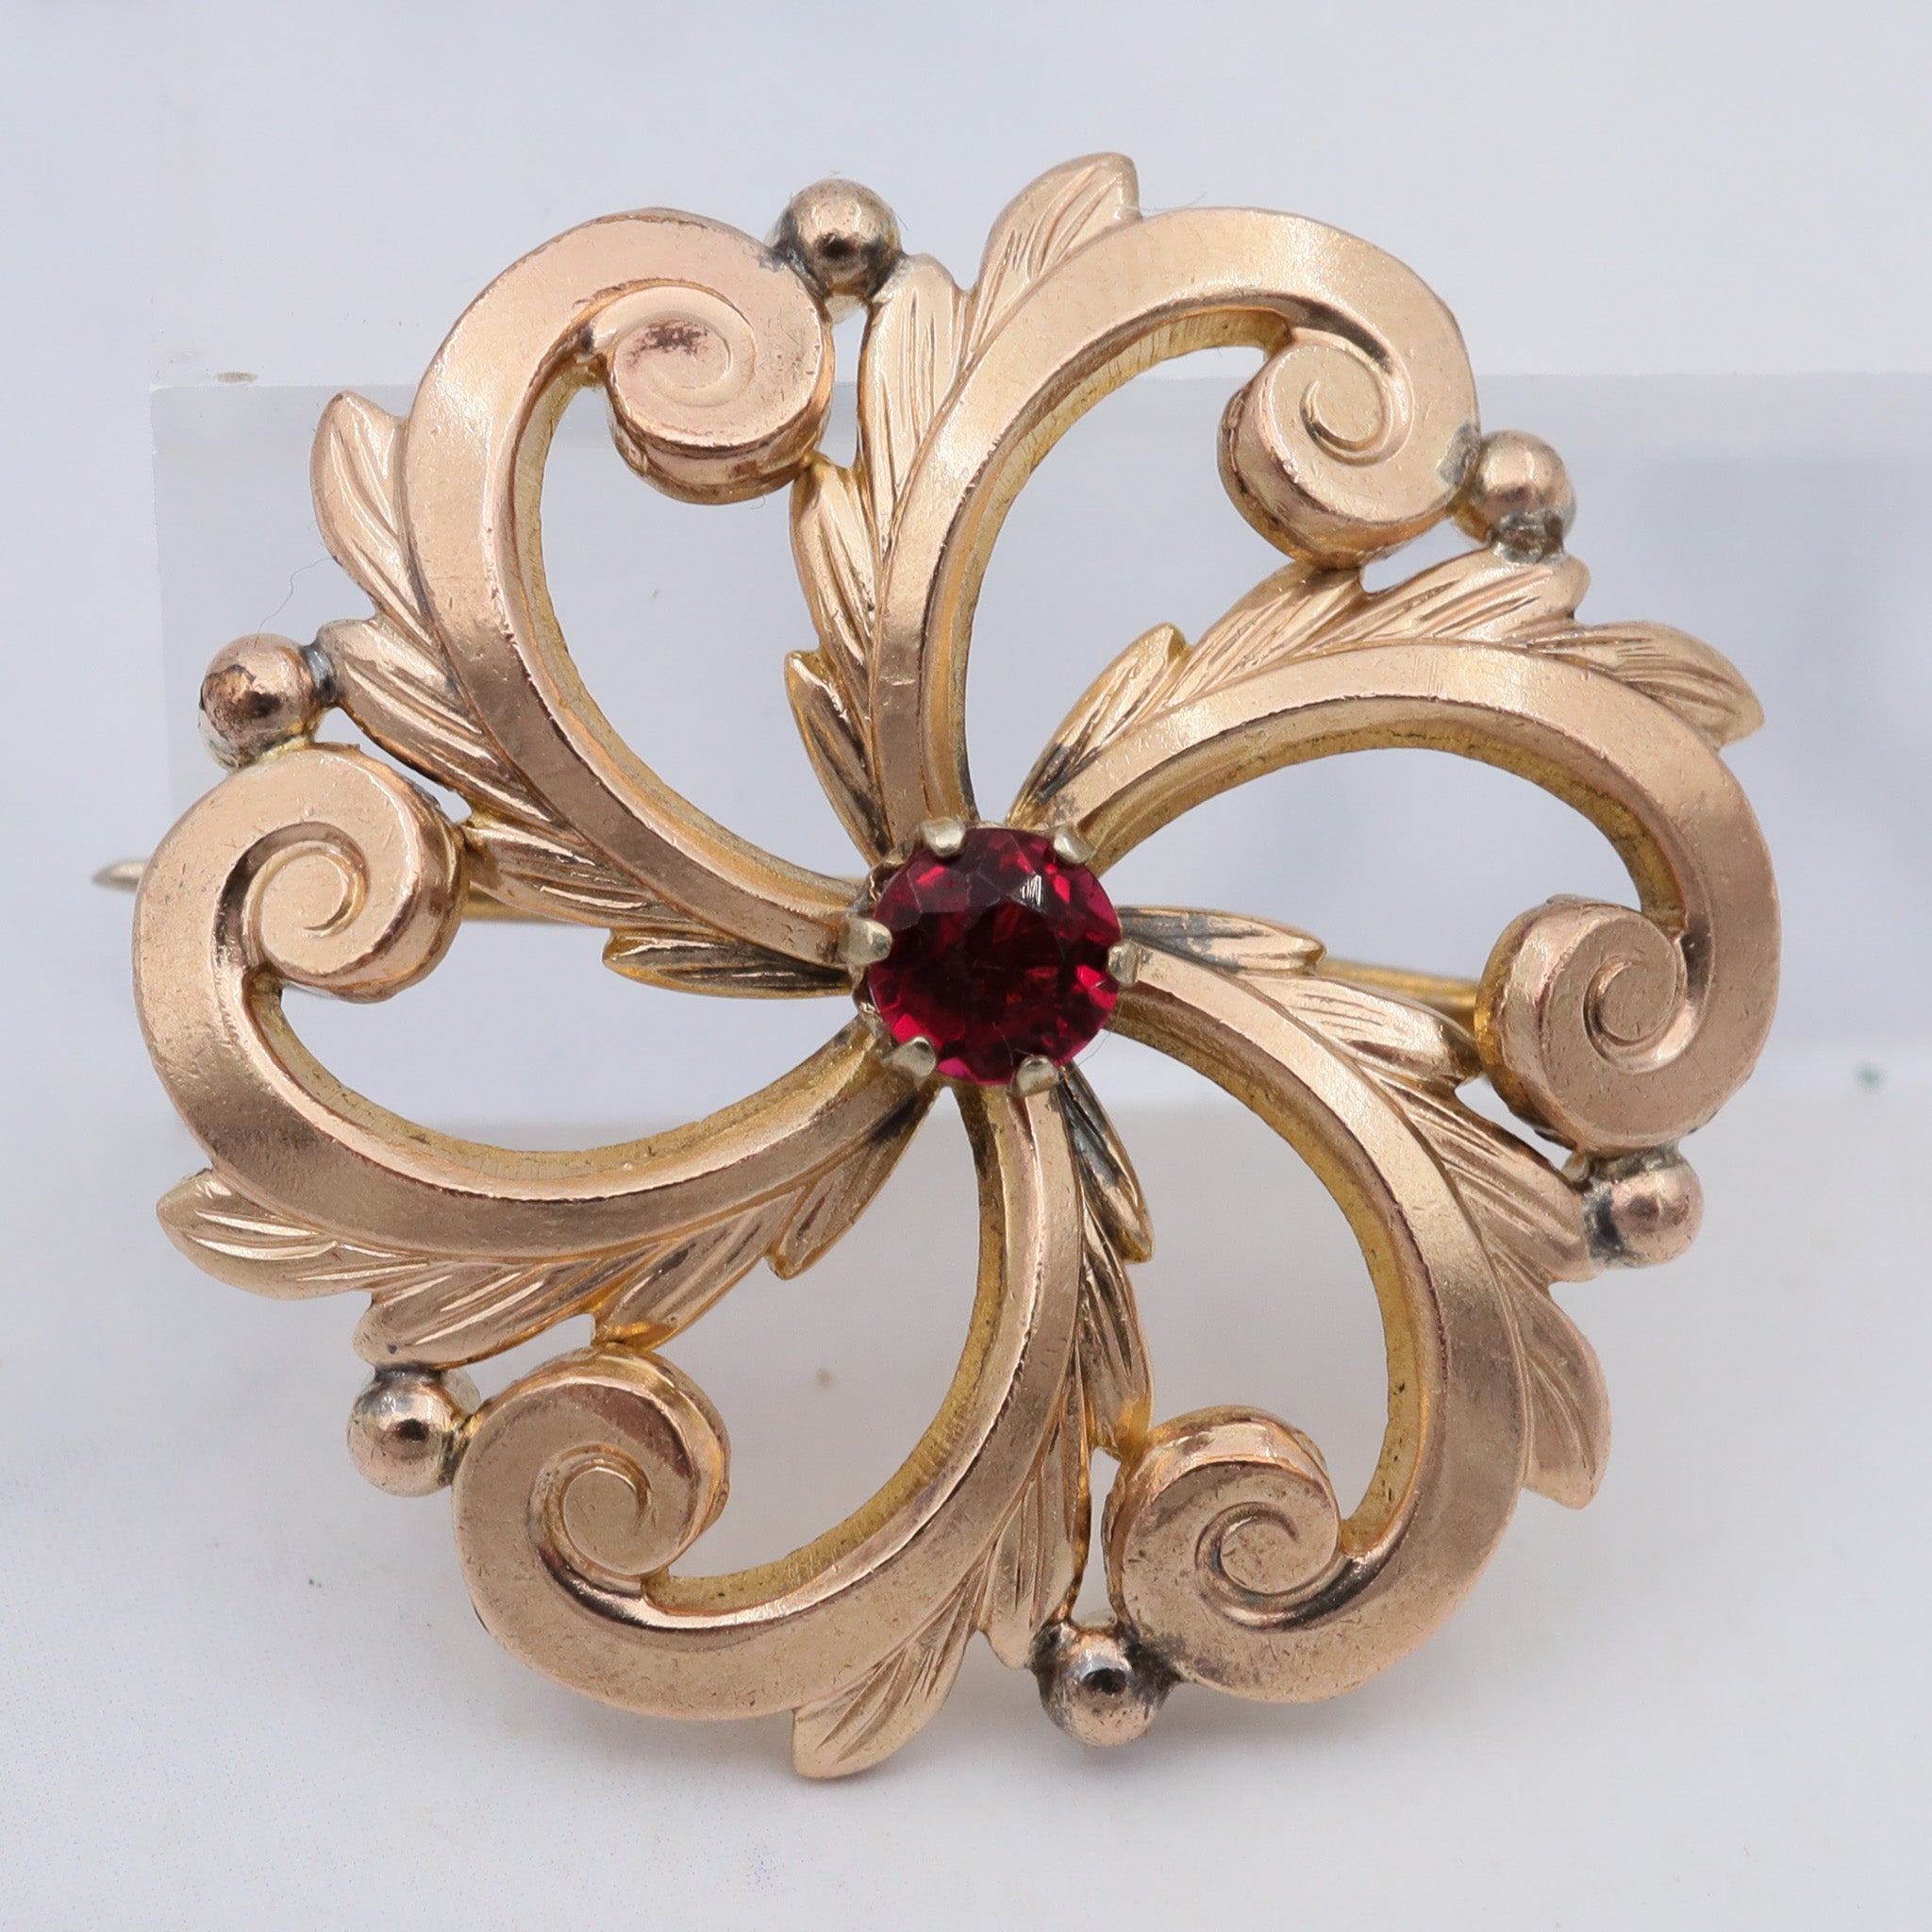 Antique Victorian pinchbeck swirl flower brooch with ruby crystal